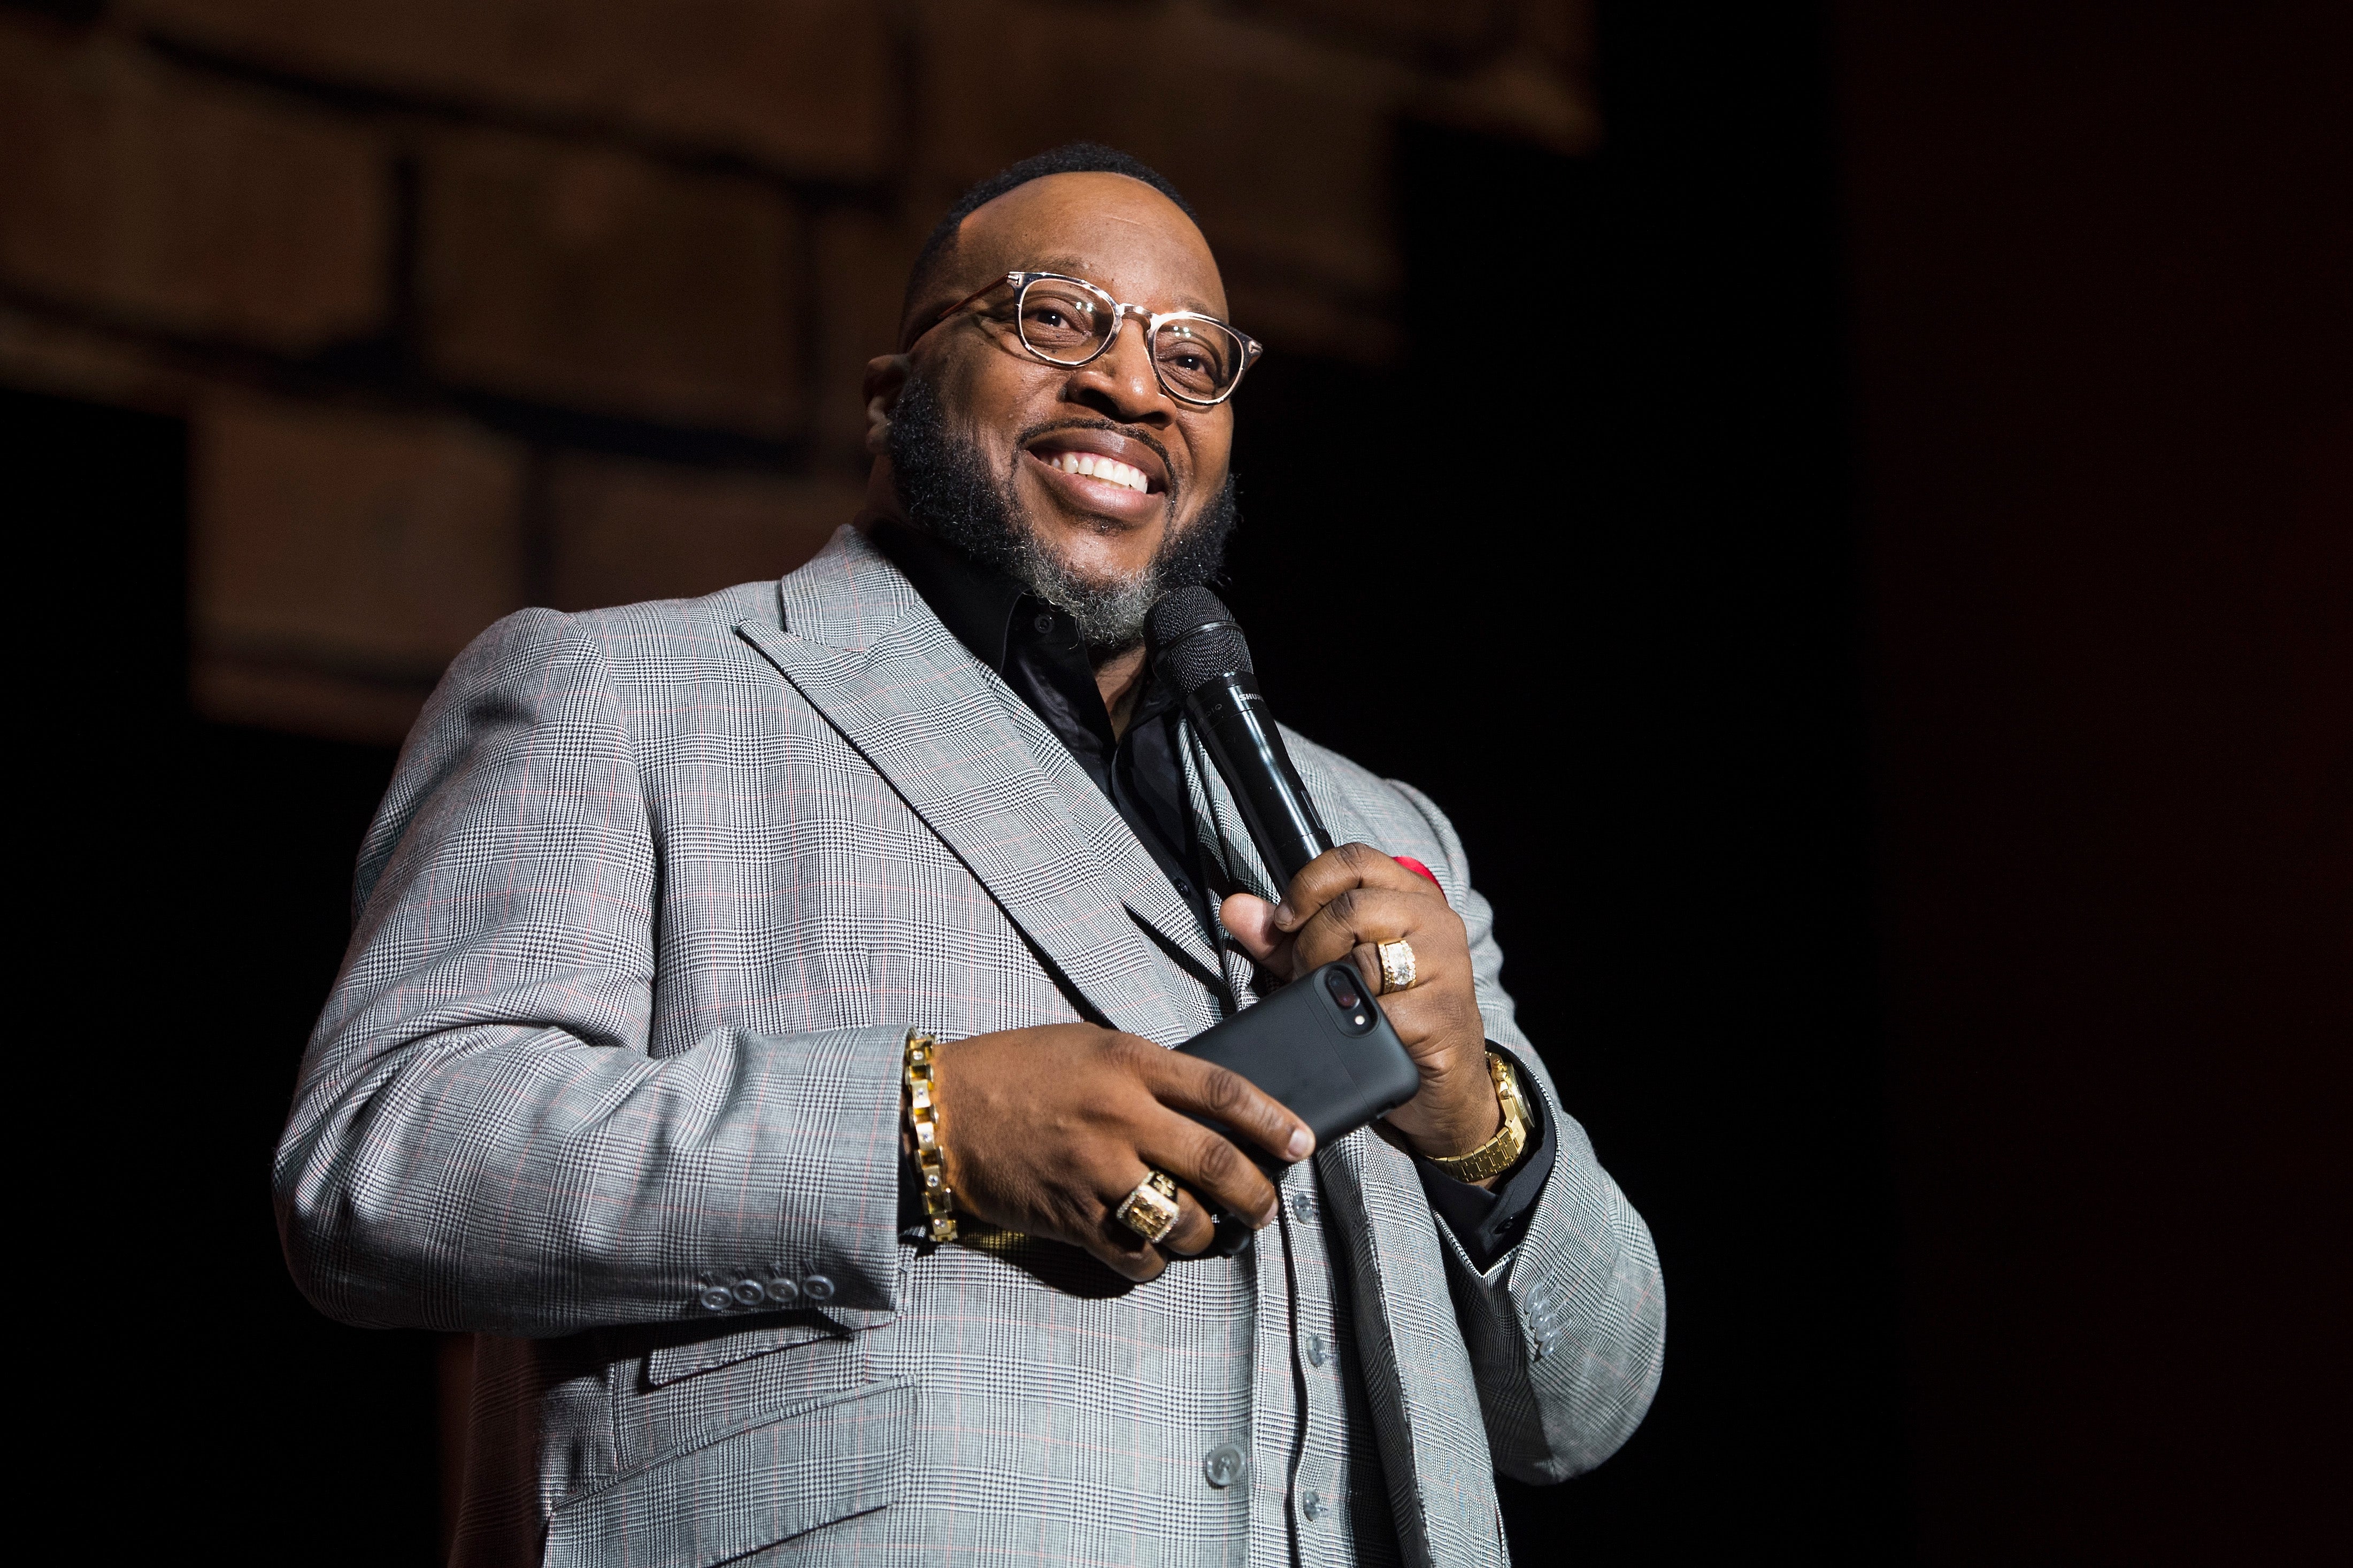 Gospel Singer And Pastor Marvin Sapp Opens Up About Love Lessons Learned As Told In His New Book,'Suitable' 
